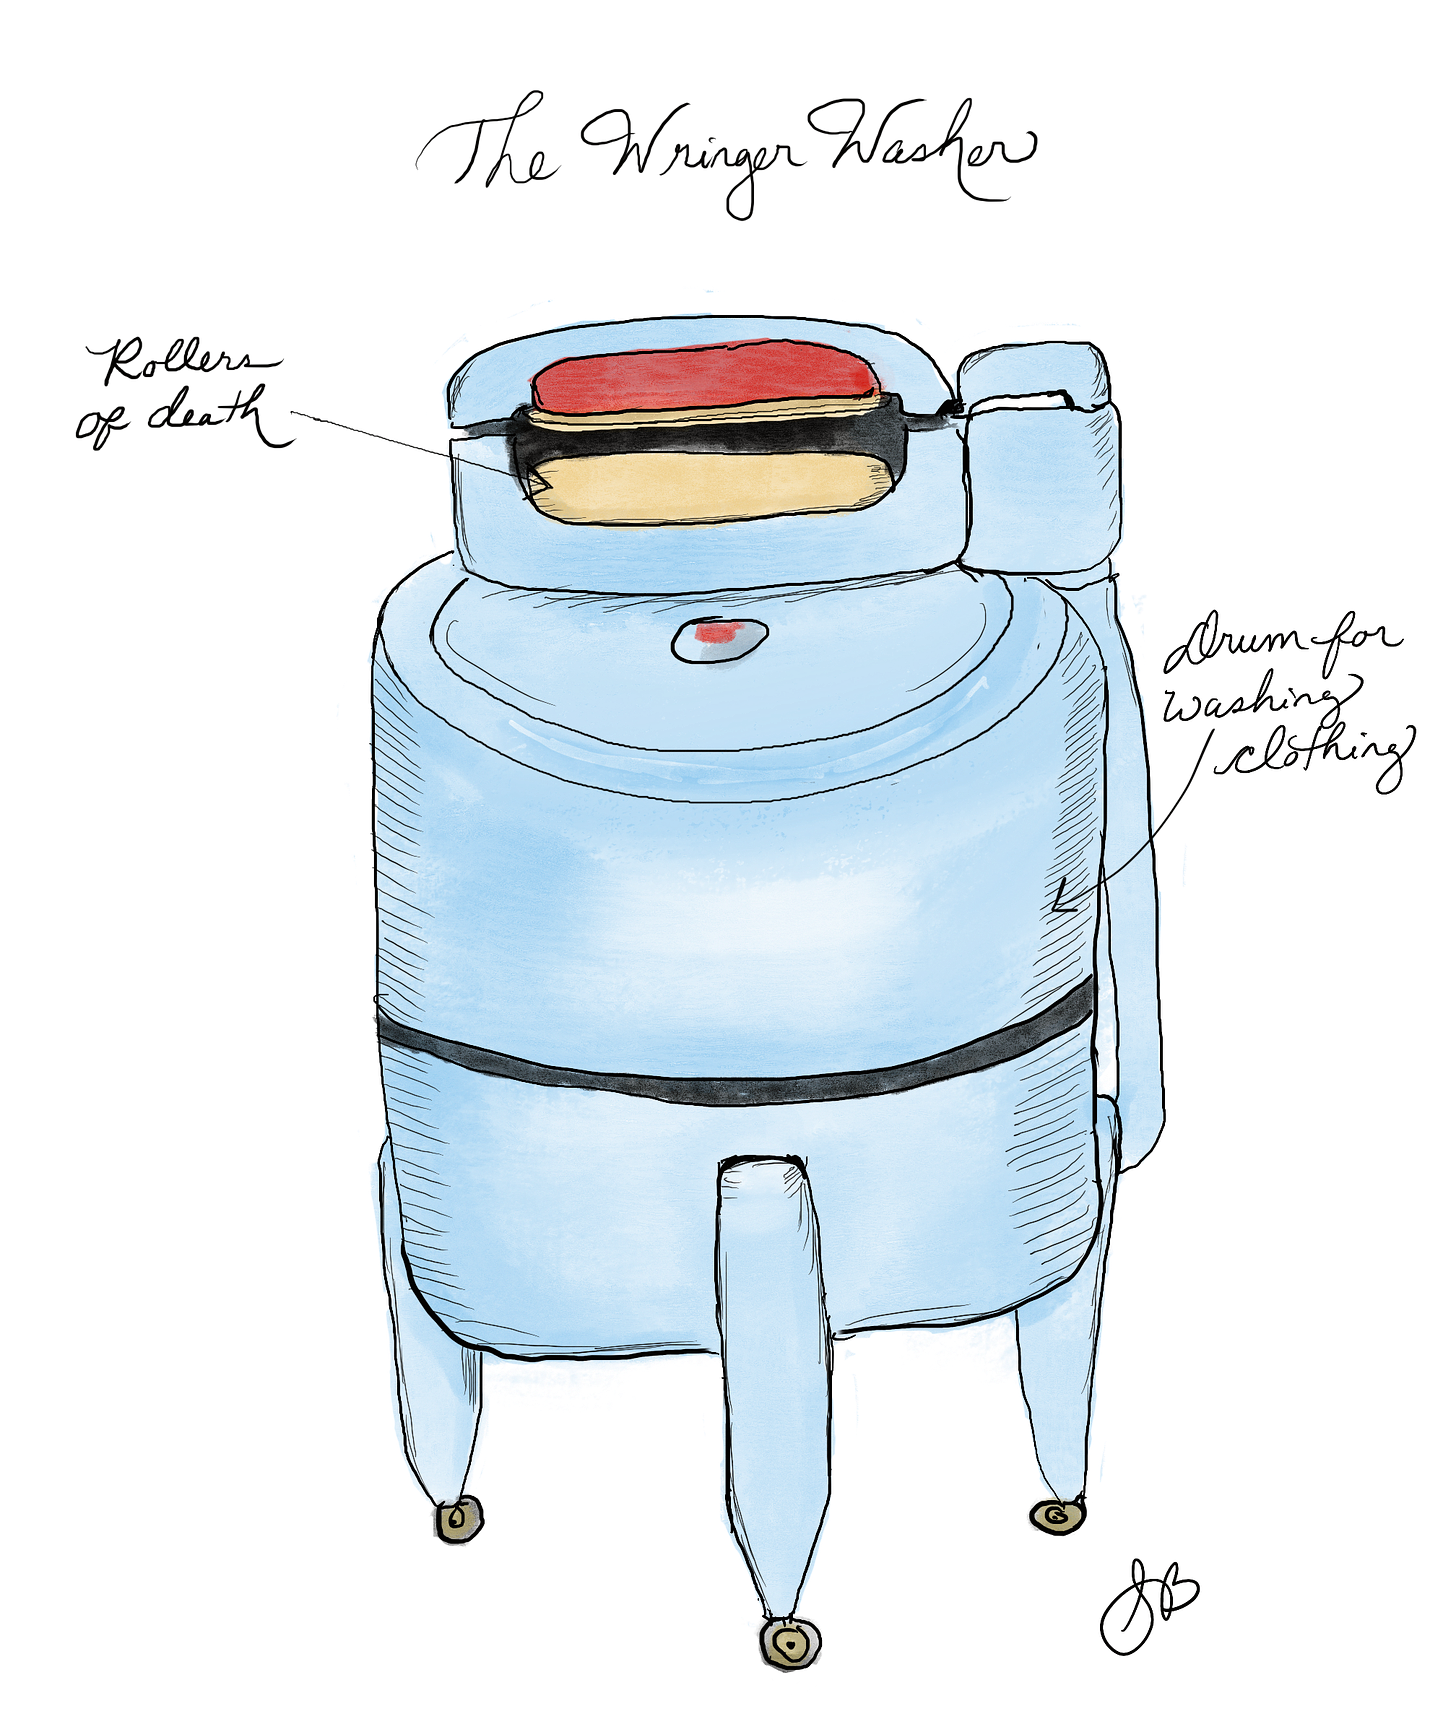 Digital art of a wringer washer that is blue. Hand lettering with an arrow to one side points at the rollers and says roller of death. Handwriting to the right with an arrow points at the body iof the washer and says “drum for washing clothing”